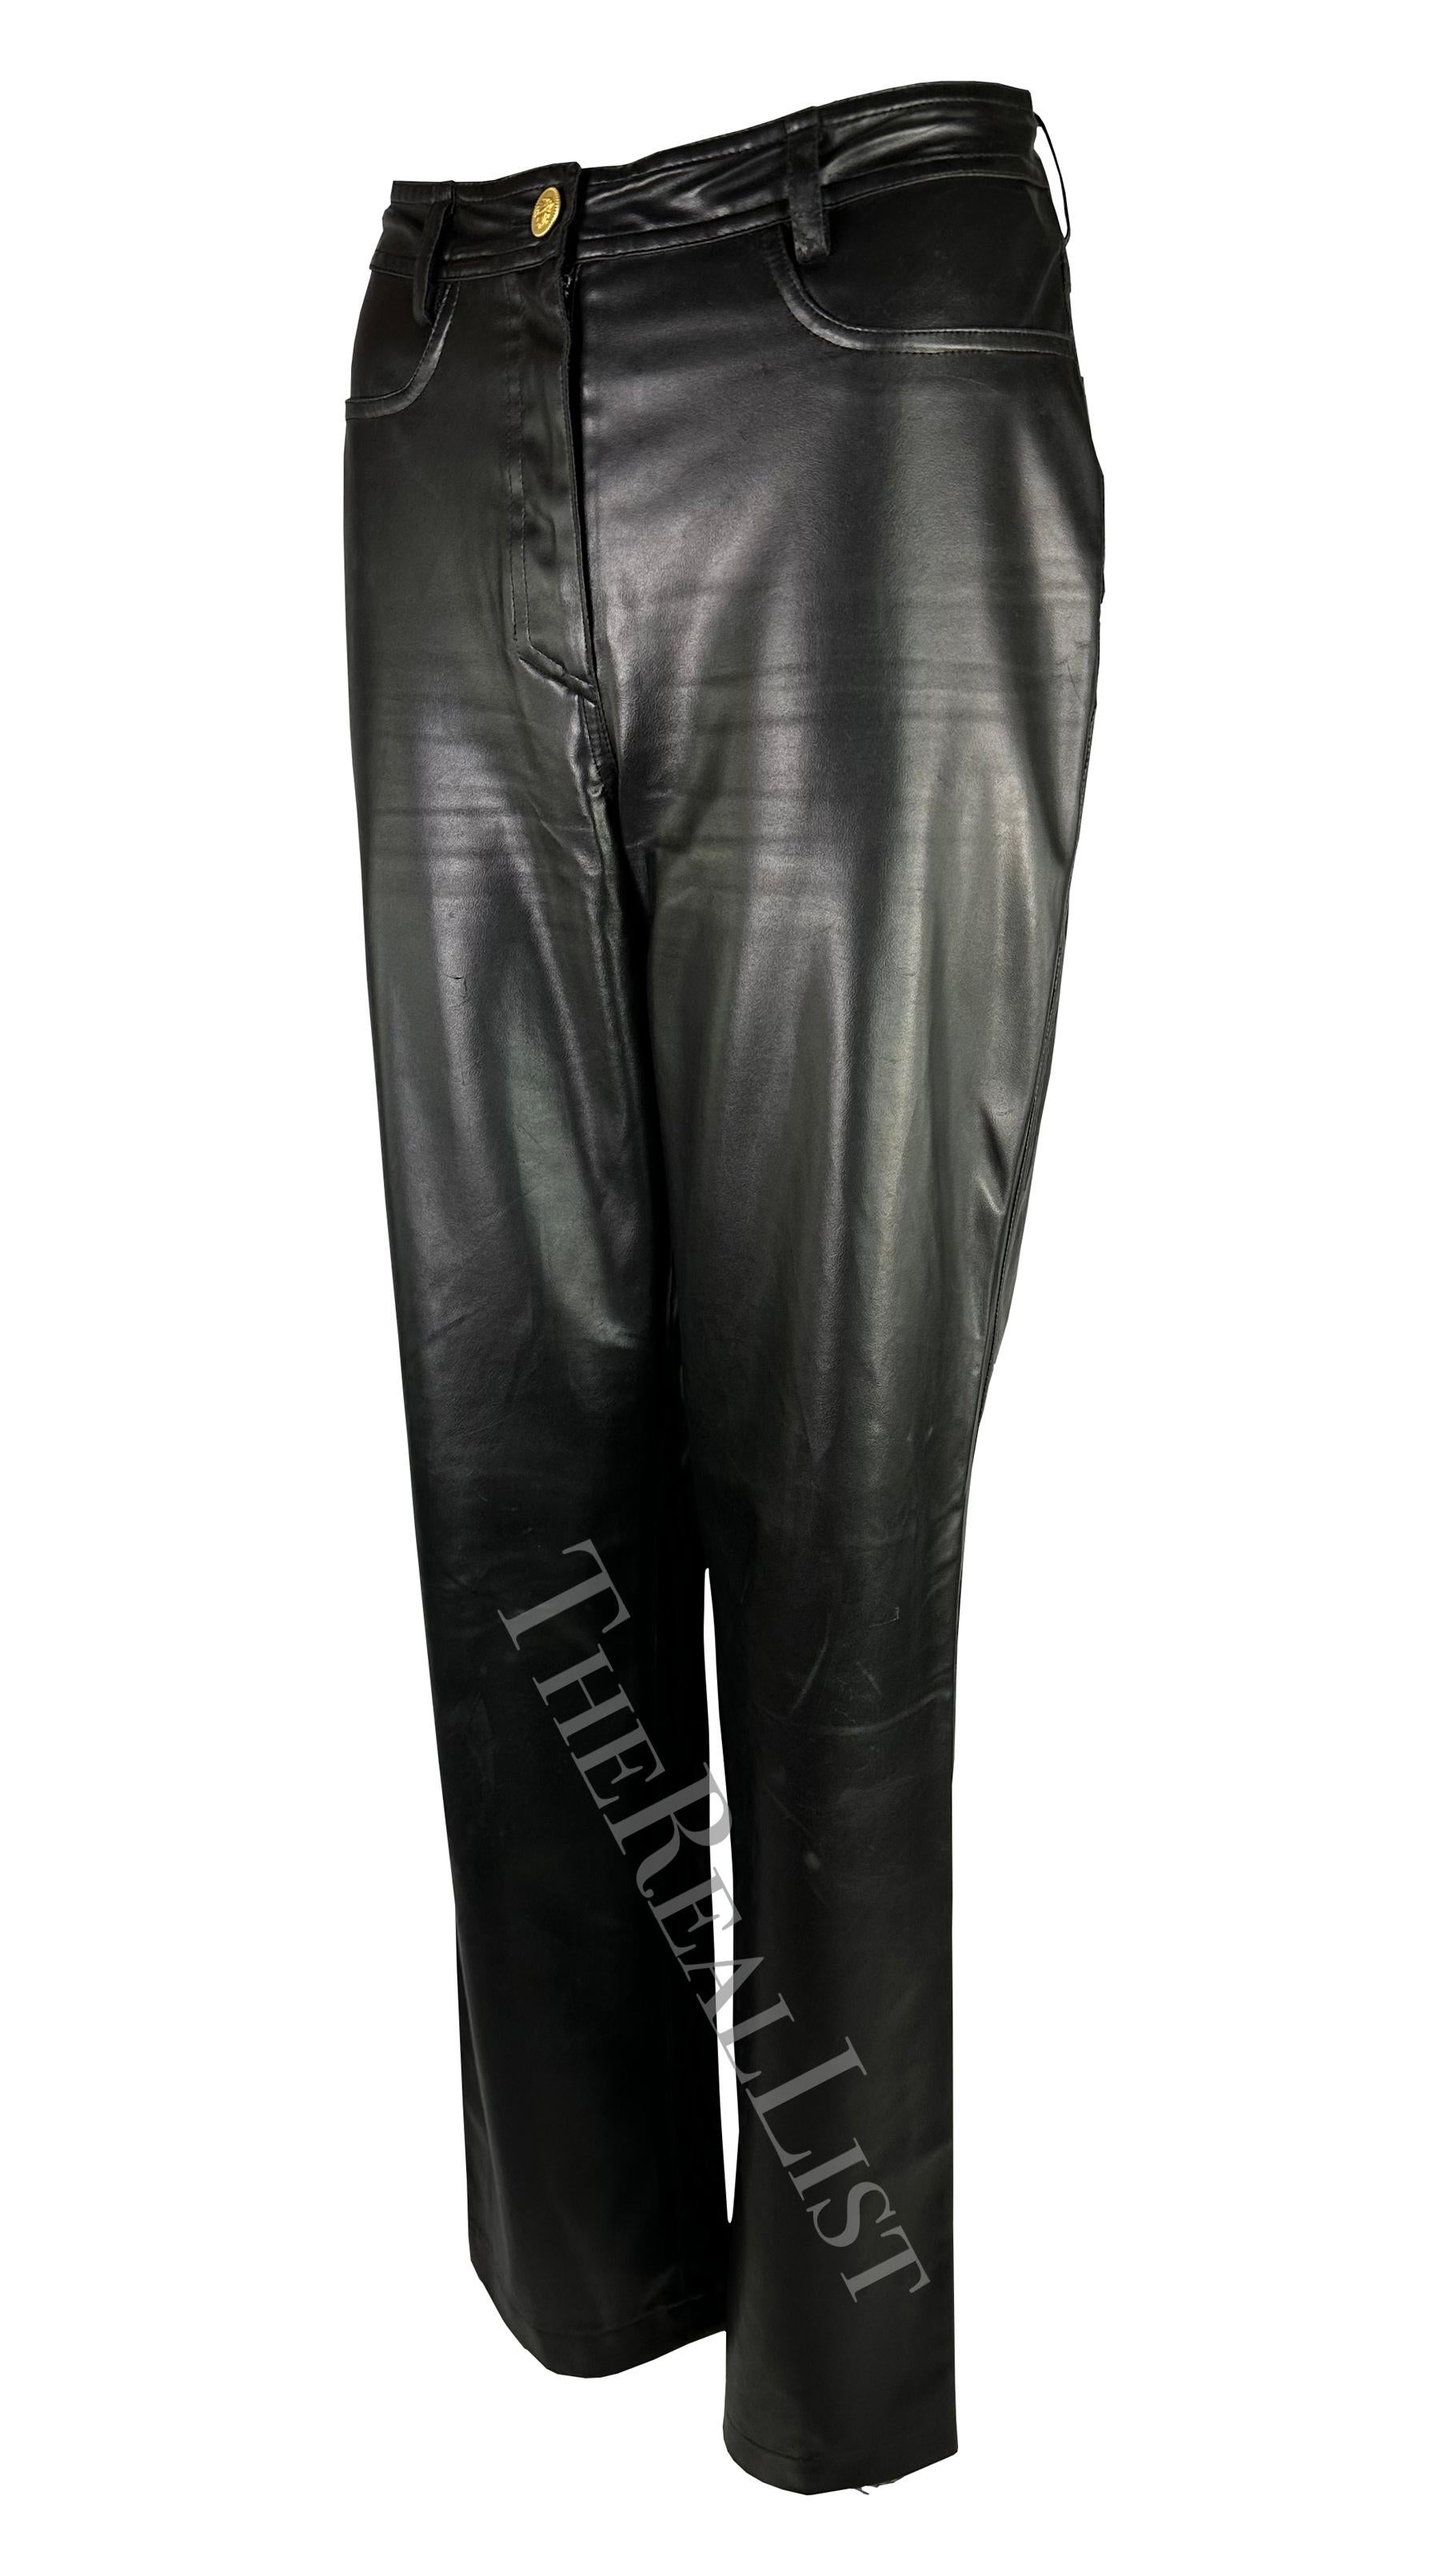 F/W 1996 Gianni Versace Black Faux Leather Wide Leg Pants In Good Condition For Sale In West Hollywood, CA